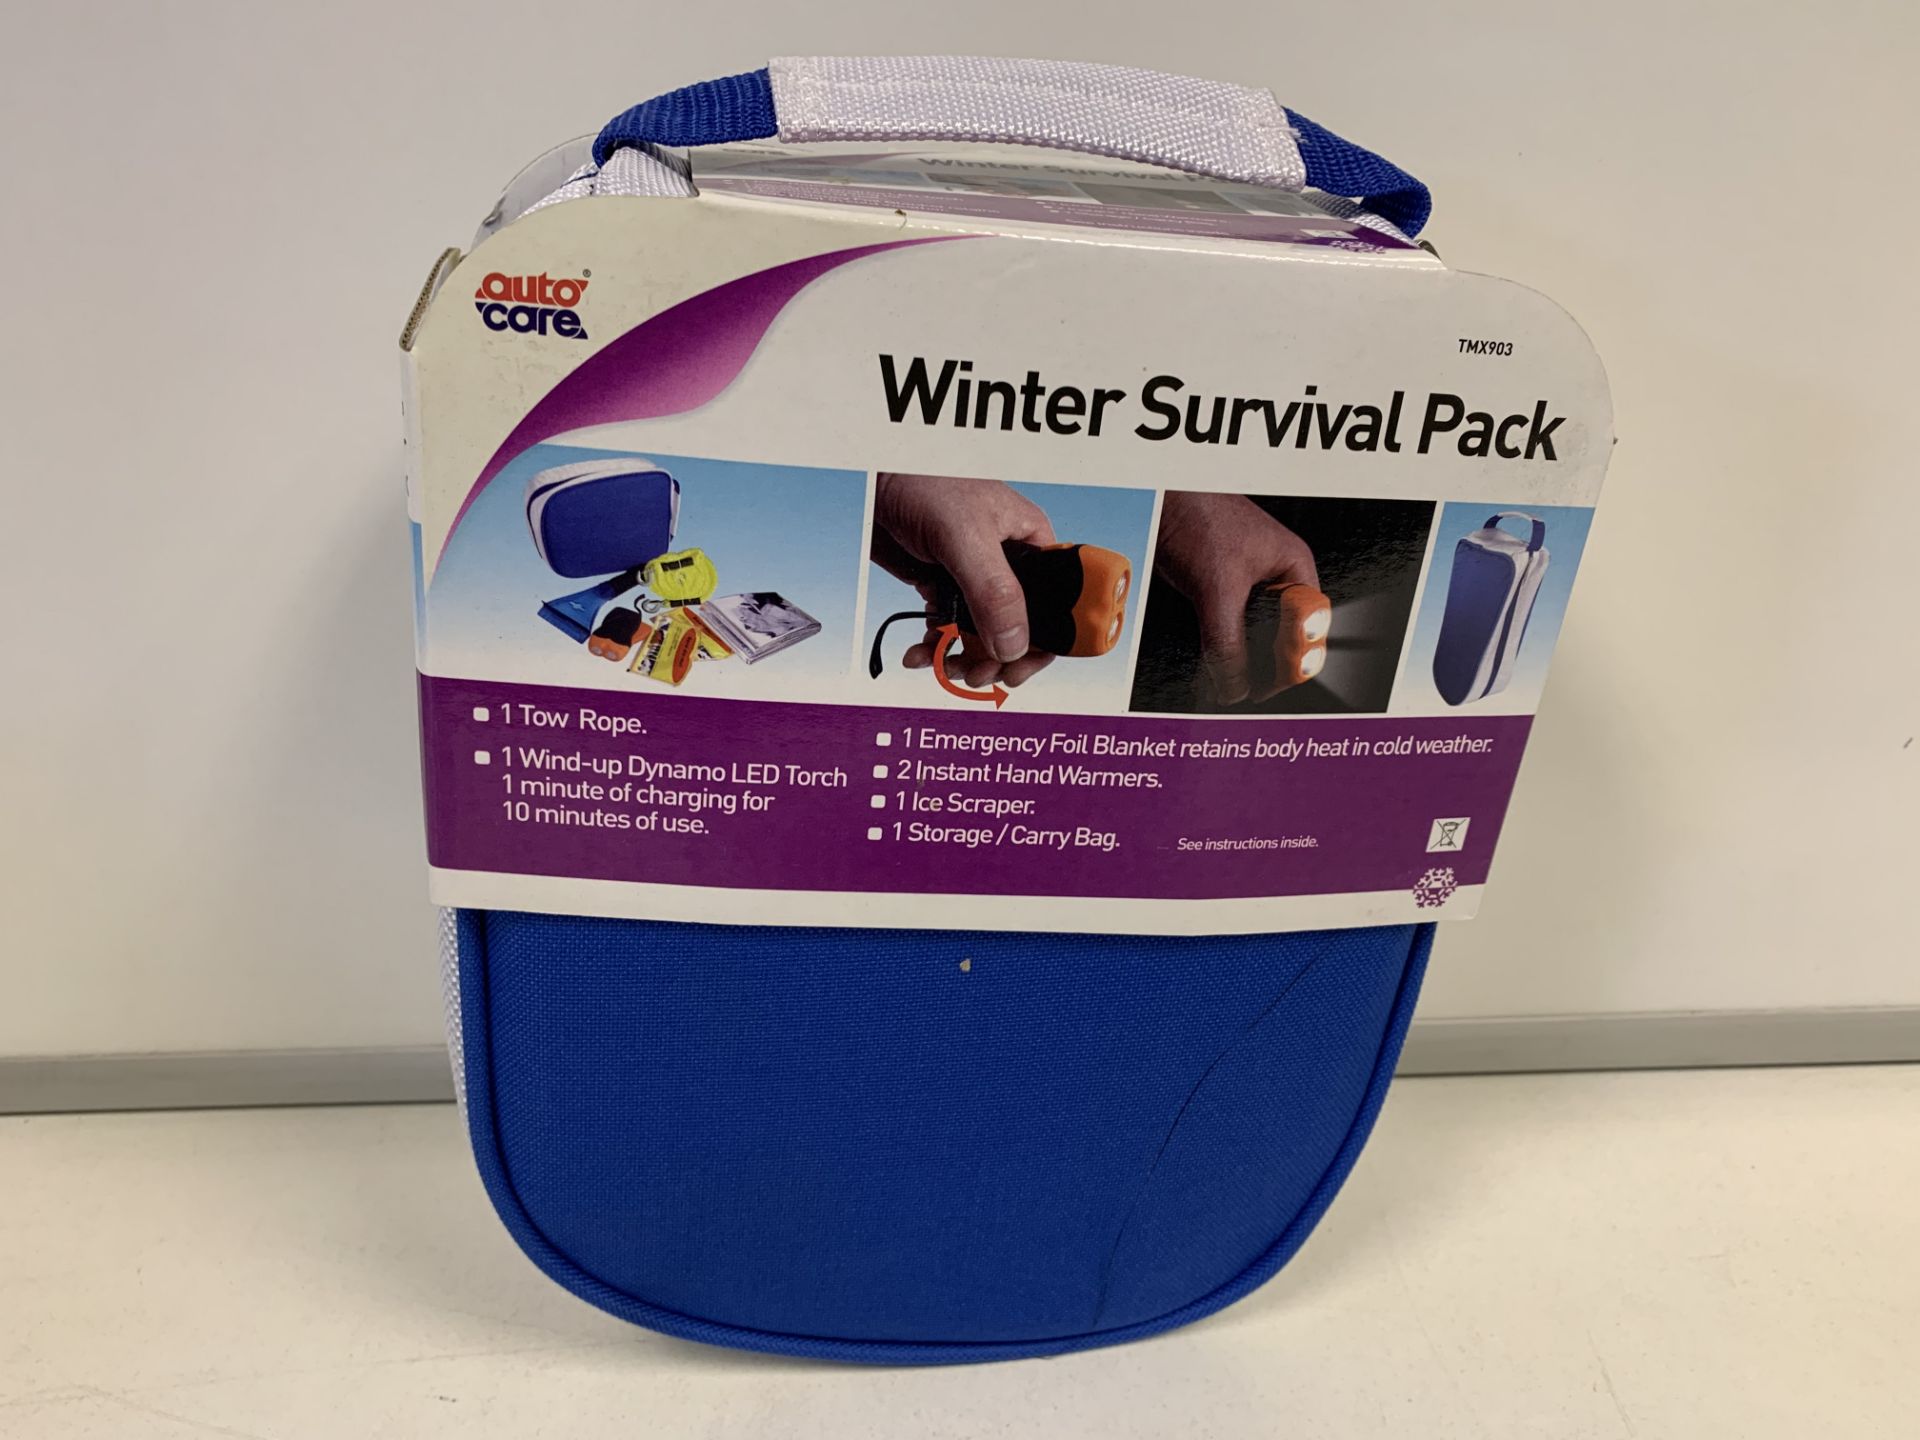 24 X BRAND NEW BOXED AUTOCARE WINTER SURVIVAL PACKS IN 3 BOXES